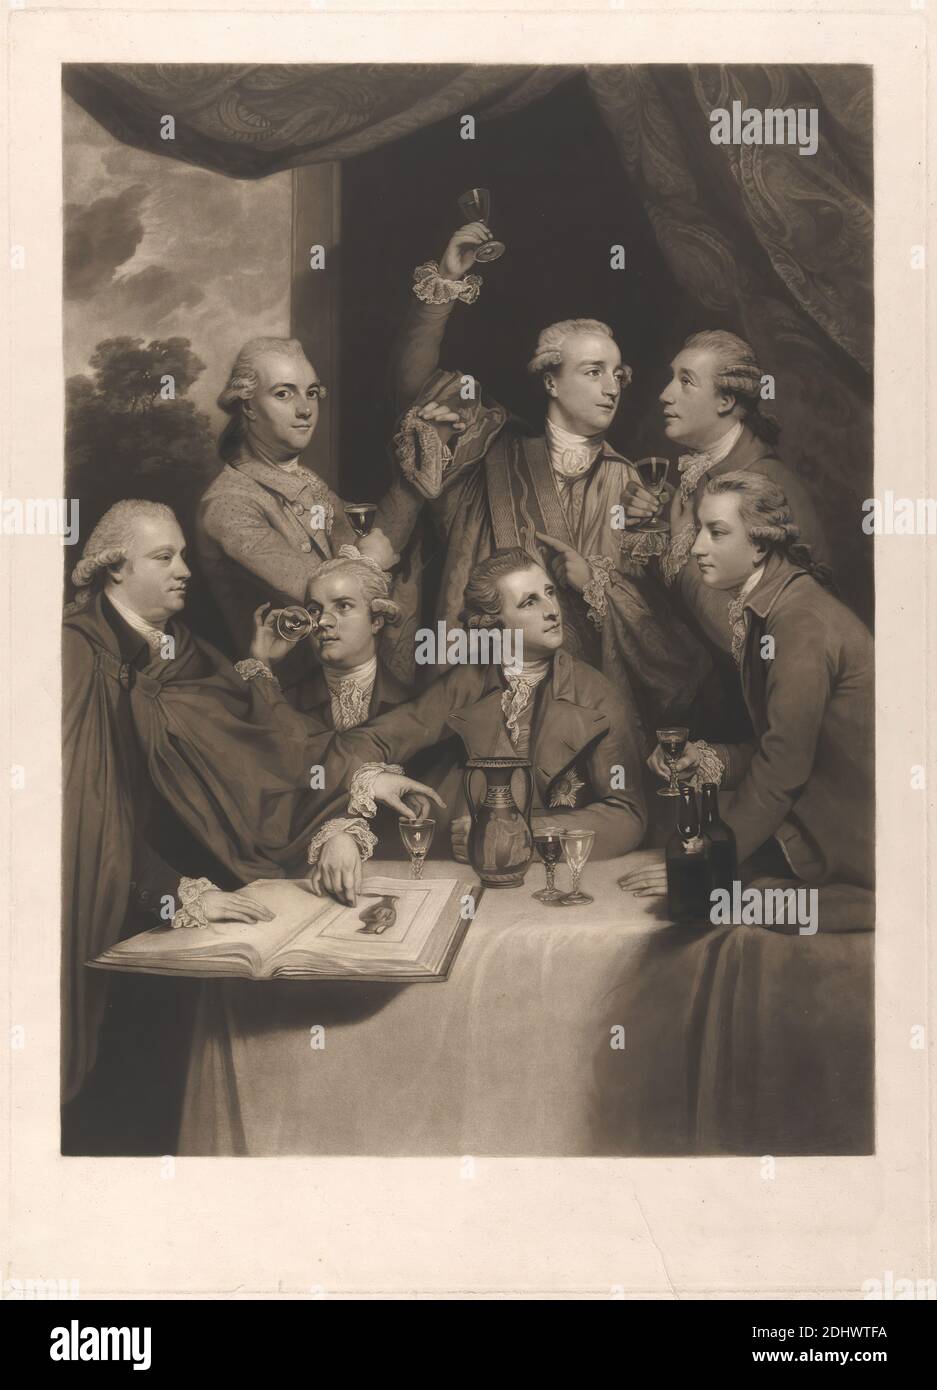 The Dilettanti Society, Print made by William Say, 1768–1834, British, after Sir Joshua Reynolds RA, 1723–1792, British, 1812, Mezzotint (proof before letters) on medium, slightly textured, cream laid paper, Sheet: 24 1/4 × 18 inches (61.6 × 45.7 cm), Plate: 23 1/8 × 16 5/8 inches (58.7 × 42.2 cm), and Image: 19 3/4 × 14 3/4 inches (50.2 × 37.5 cm), book, bottles, conversation piece, costume, drinking glasses, food, genre subject, Grand Tour, men, portrait, society, vase, wine Stock Photo